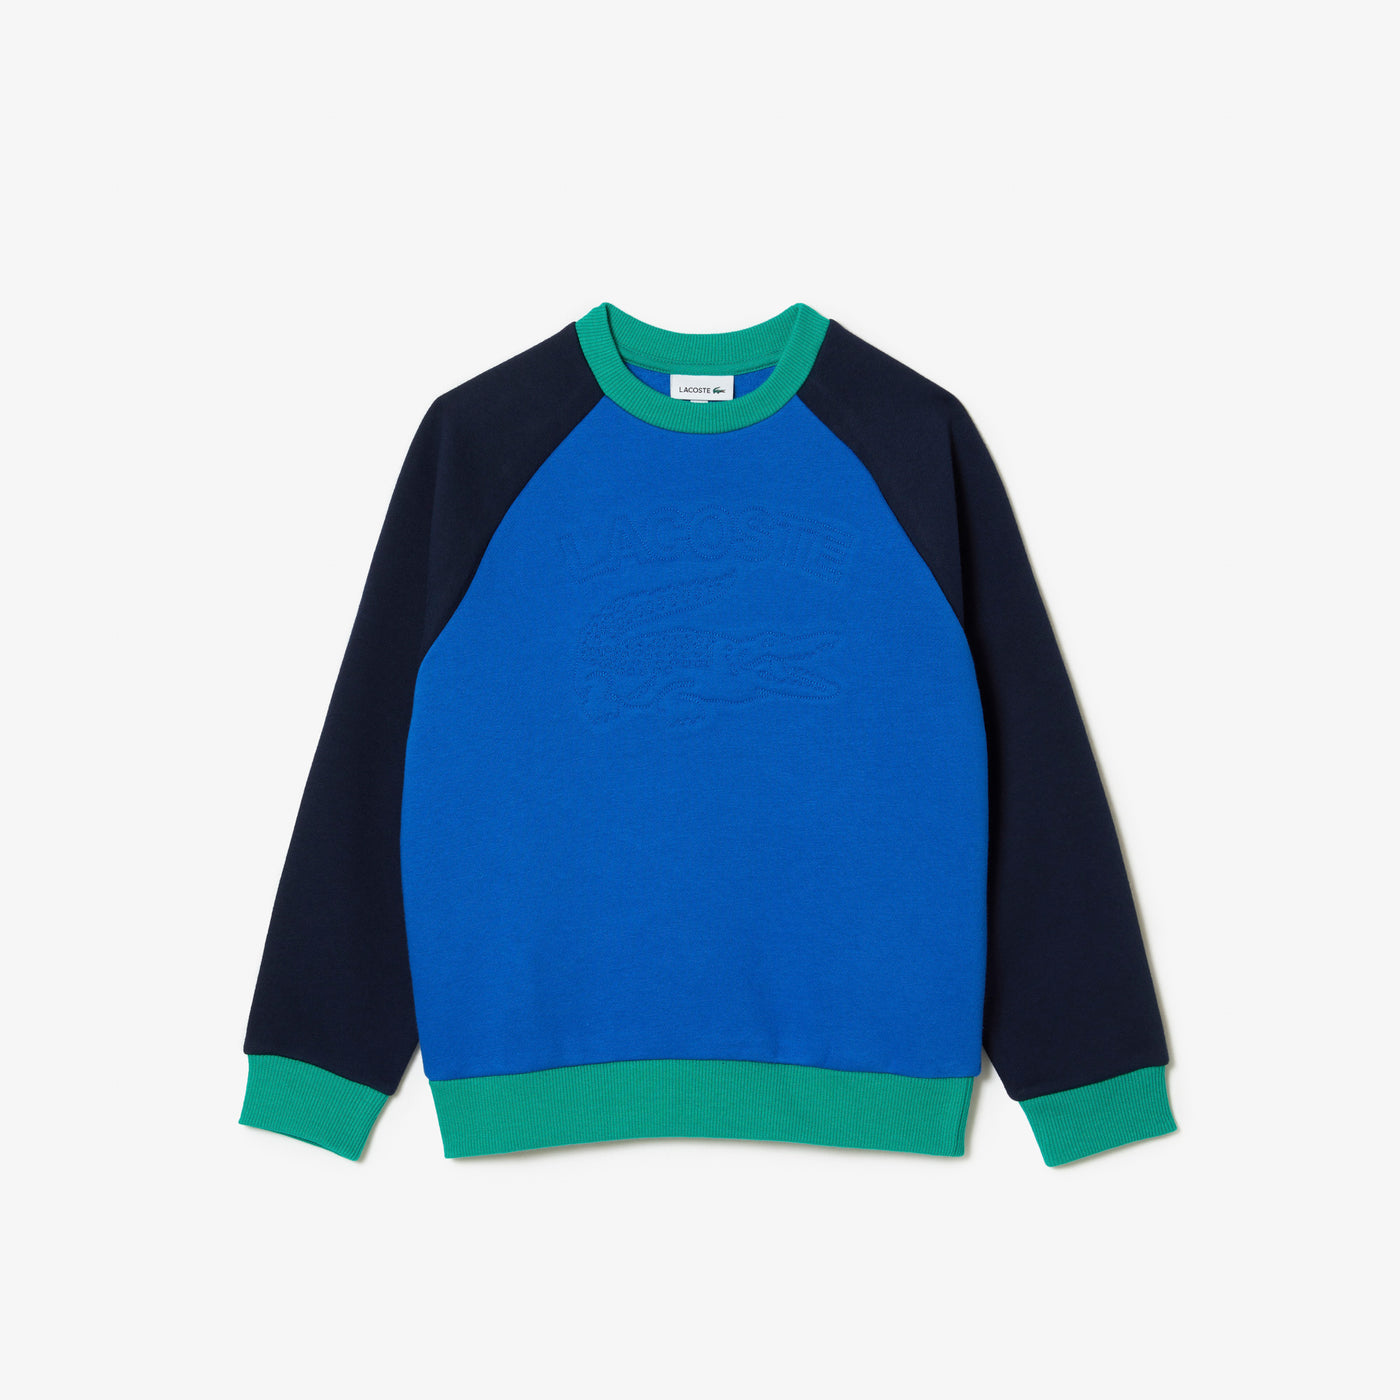 Shop The Latest Collection Of Lacoste Boys' Lacoste Branded Colour-Block Sweatshirt - Sj9818 In Lebanon